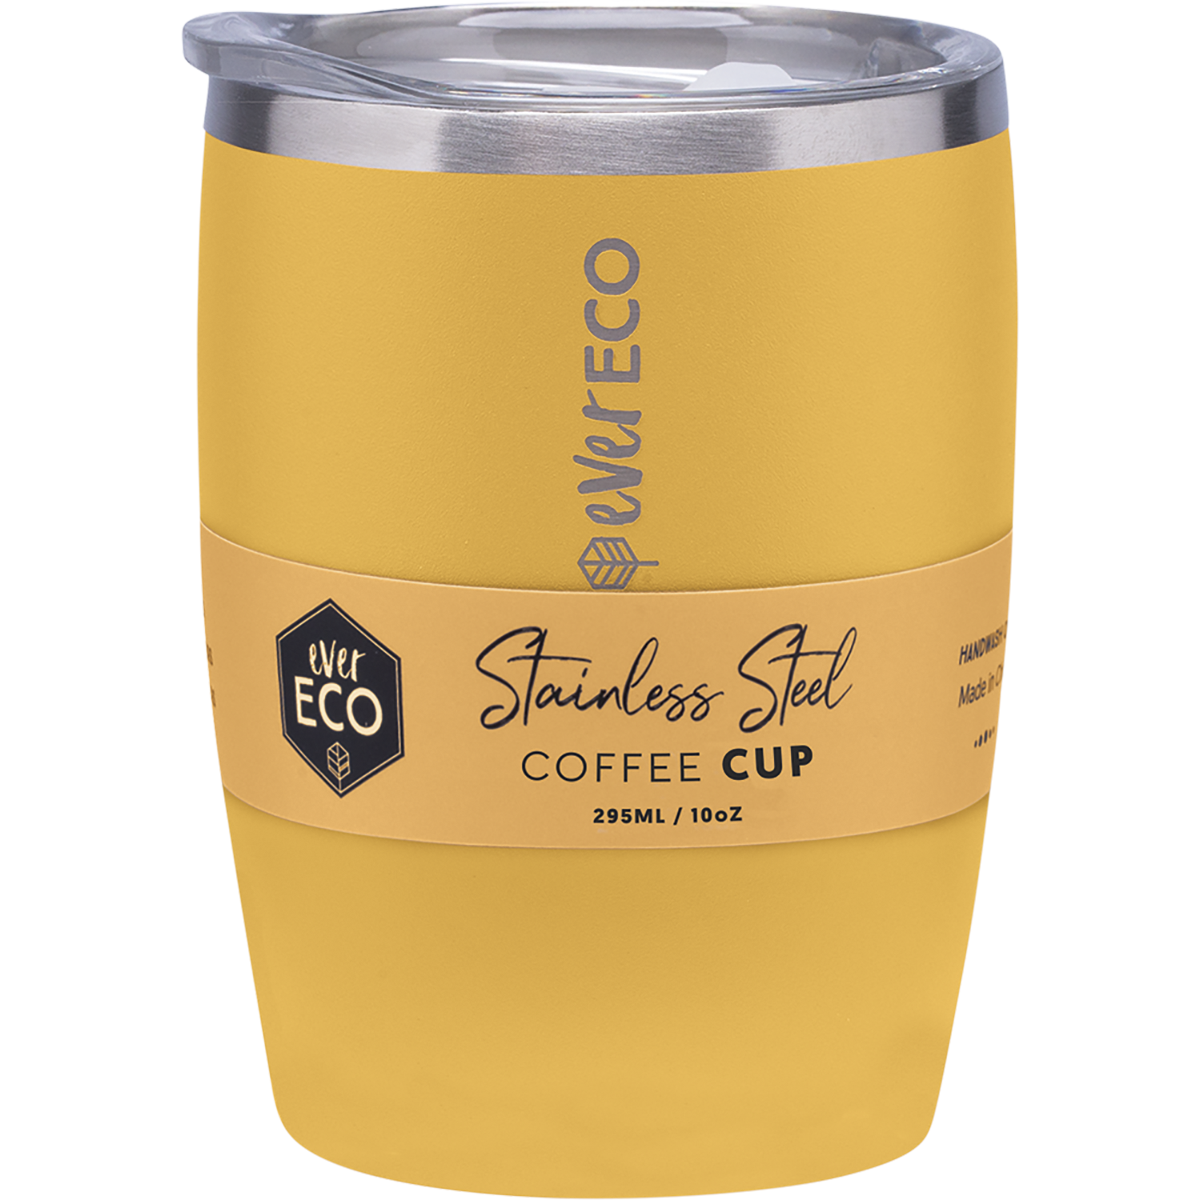 Ever-Eco-Stainless-Steel-Coffee-Cup-295ml-Marigold